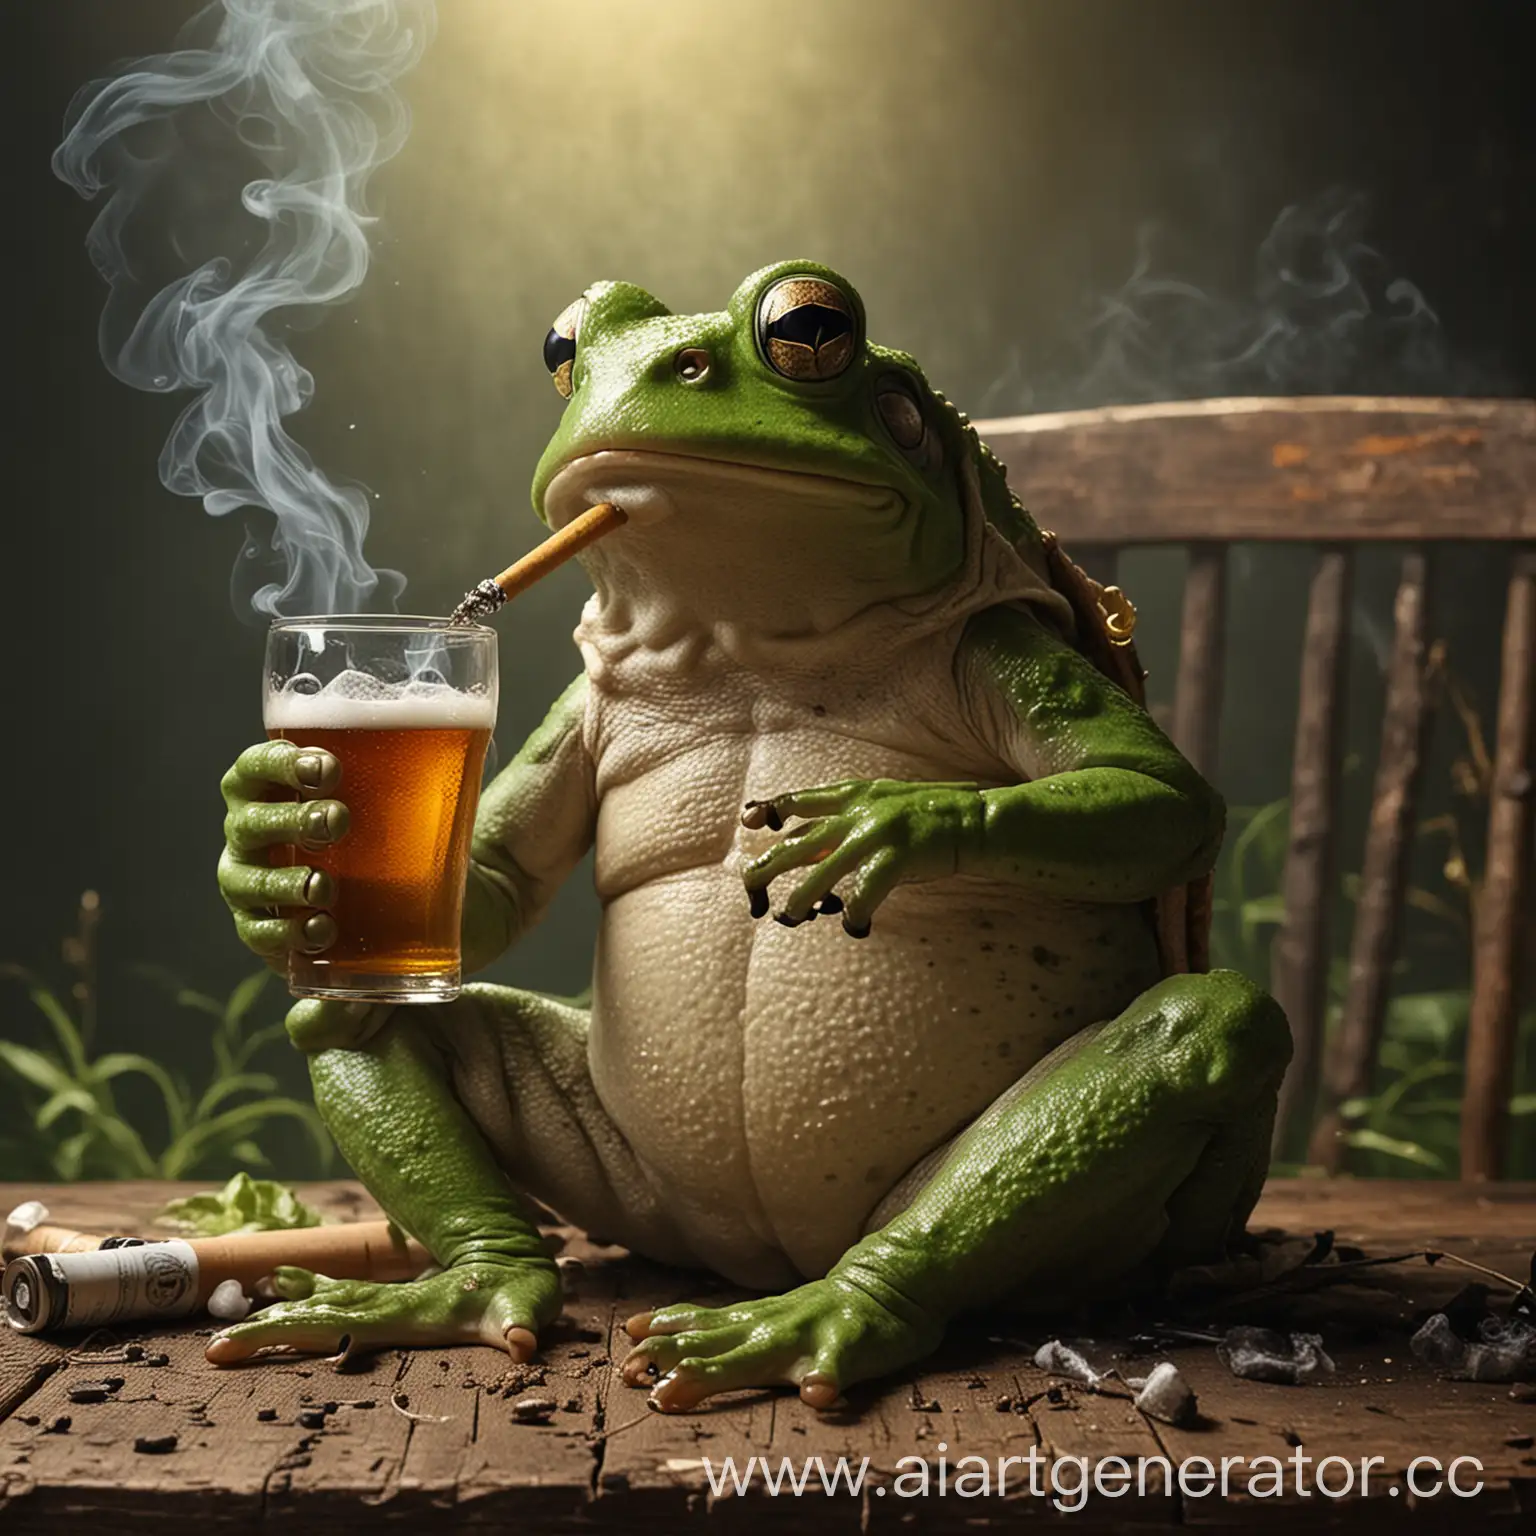 Frog-Drinking-Beer-and-Smoking-Quirky-Amphibian-Indulging-in-Human-Vices